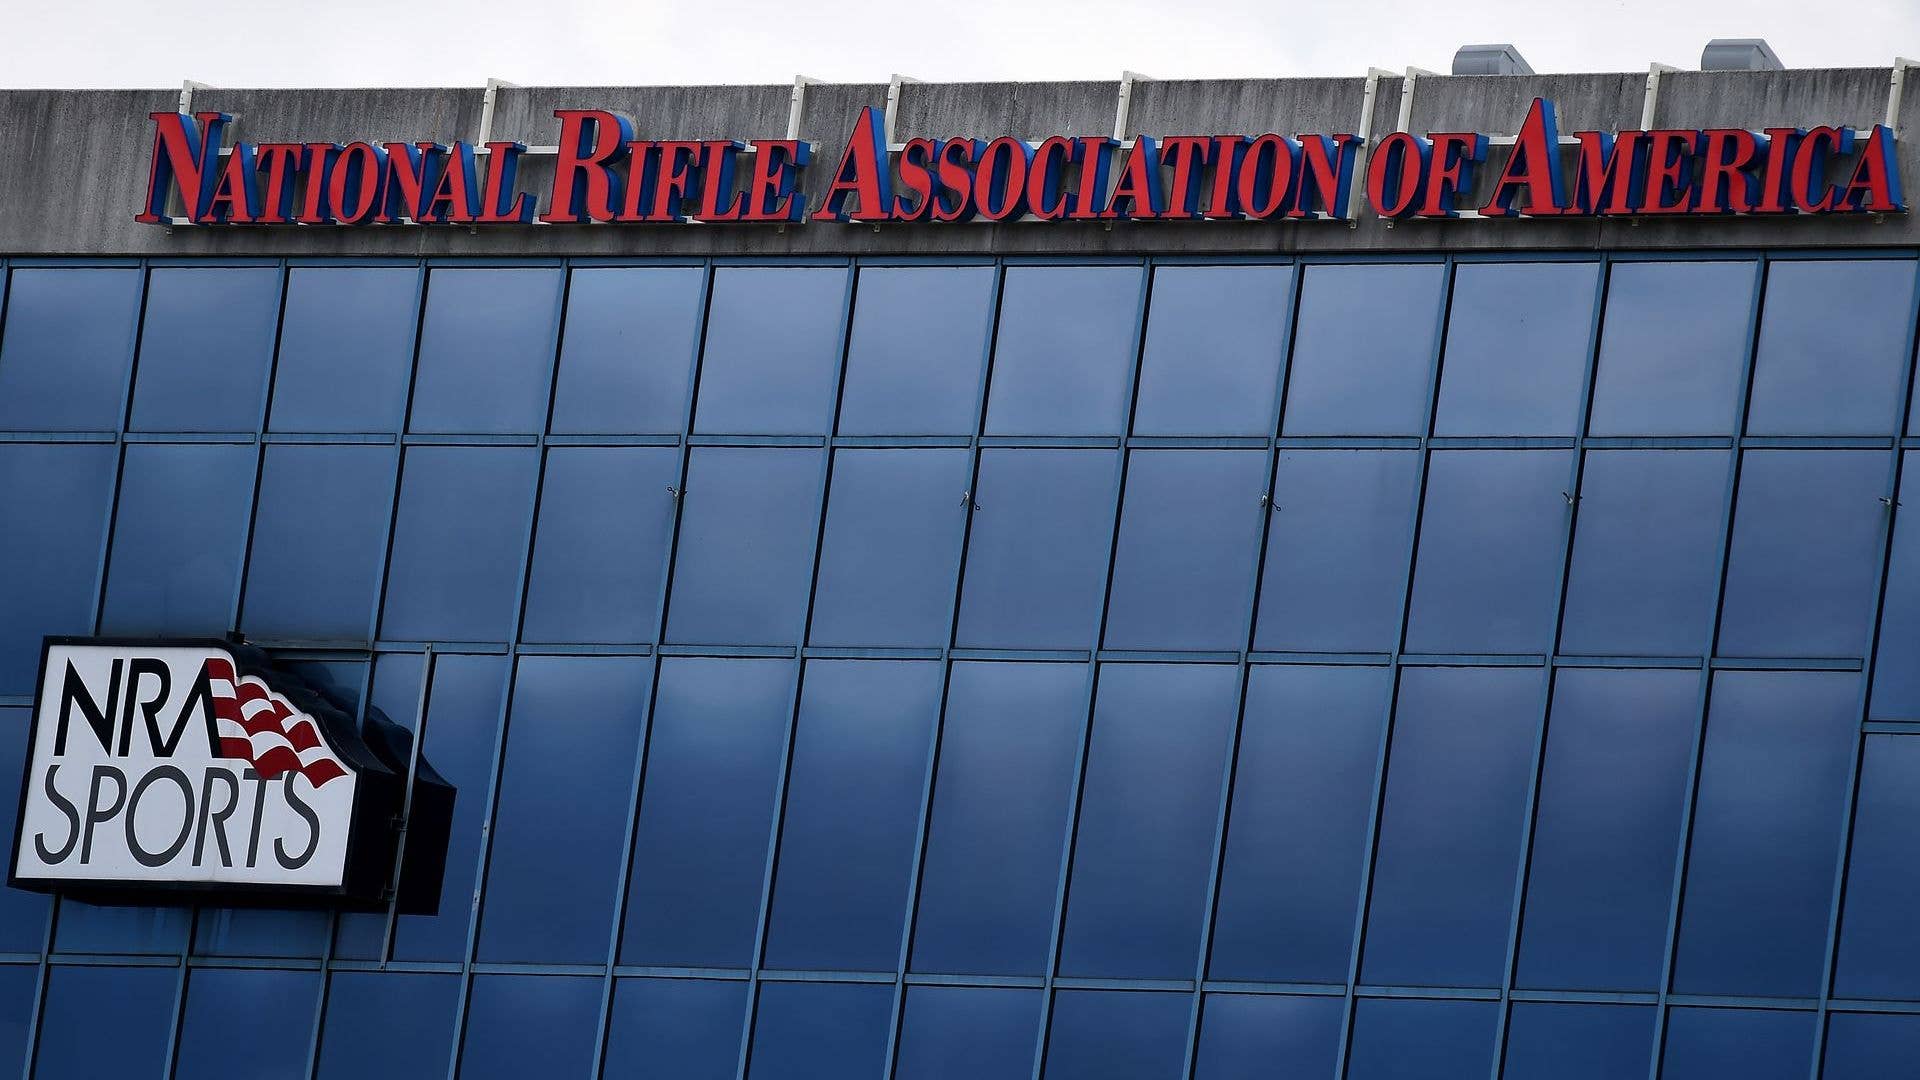 The National Rifle Association of America headquarters